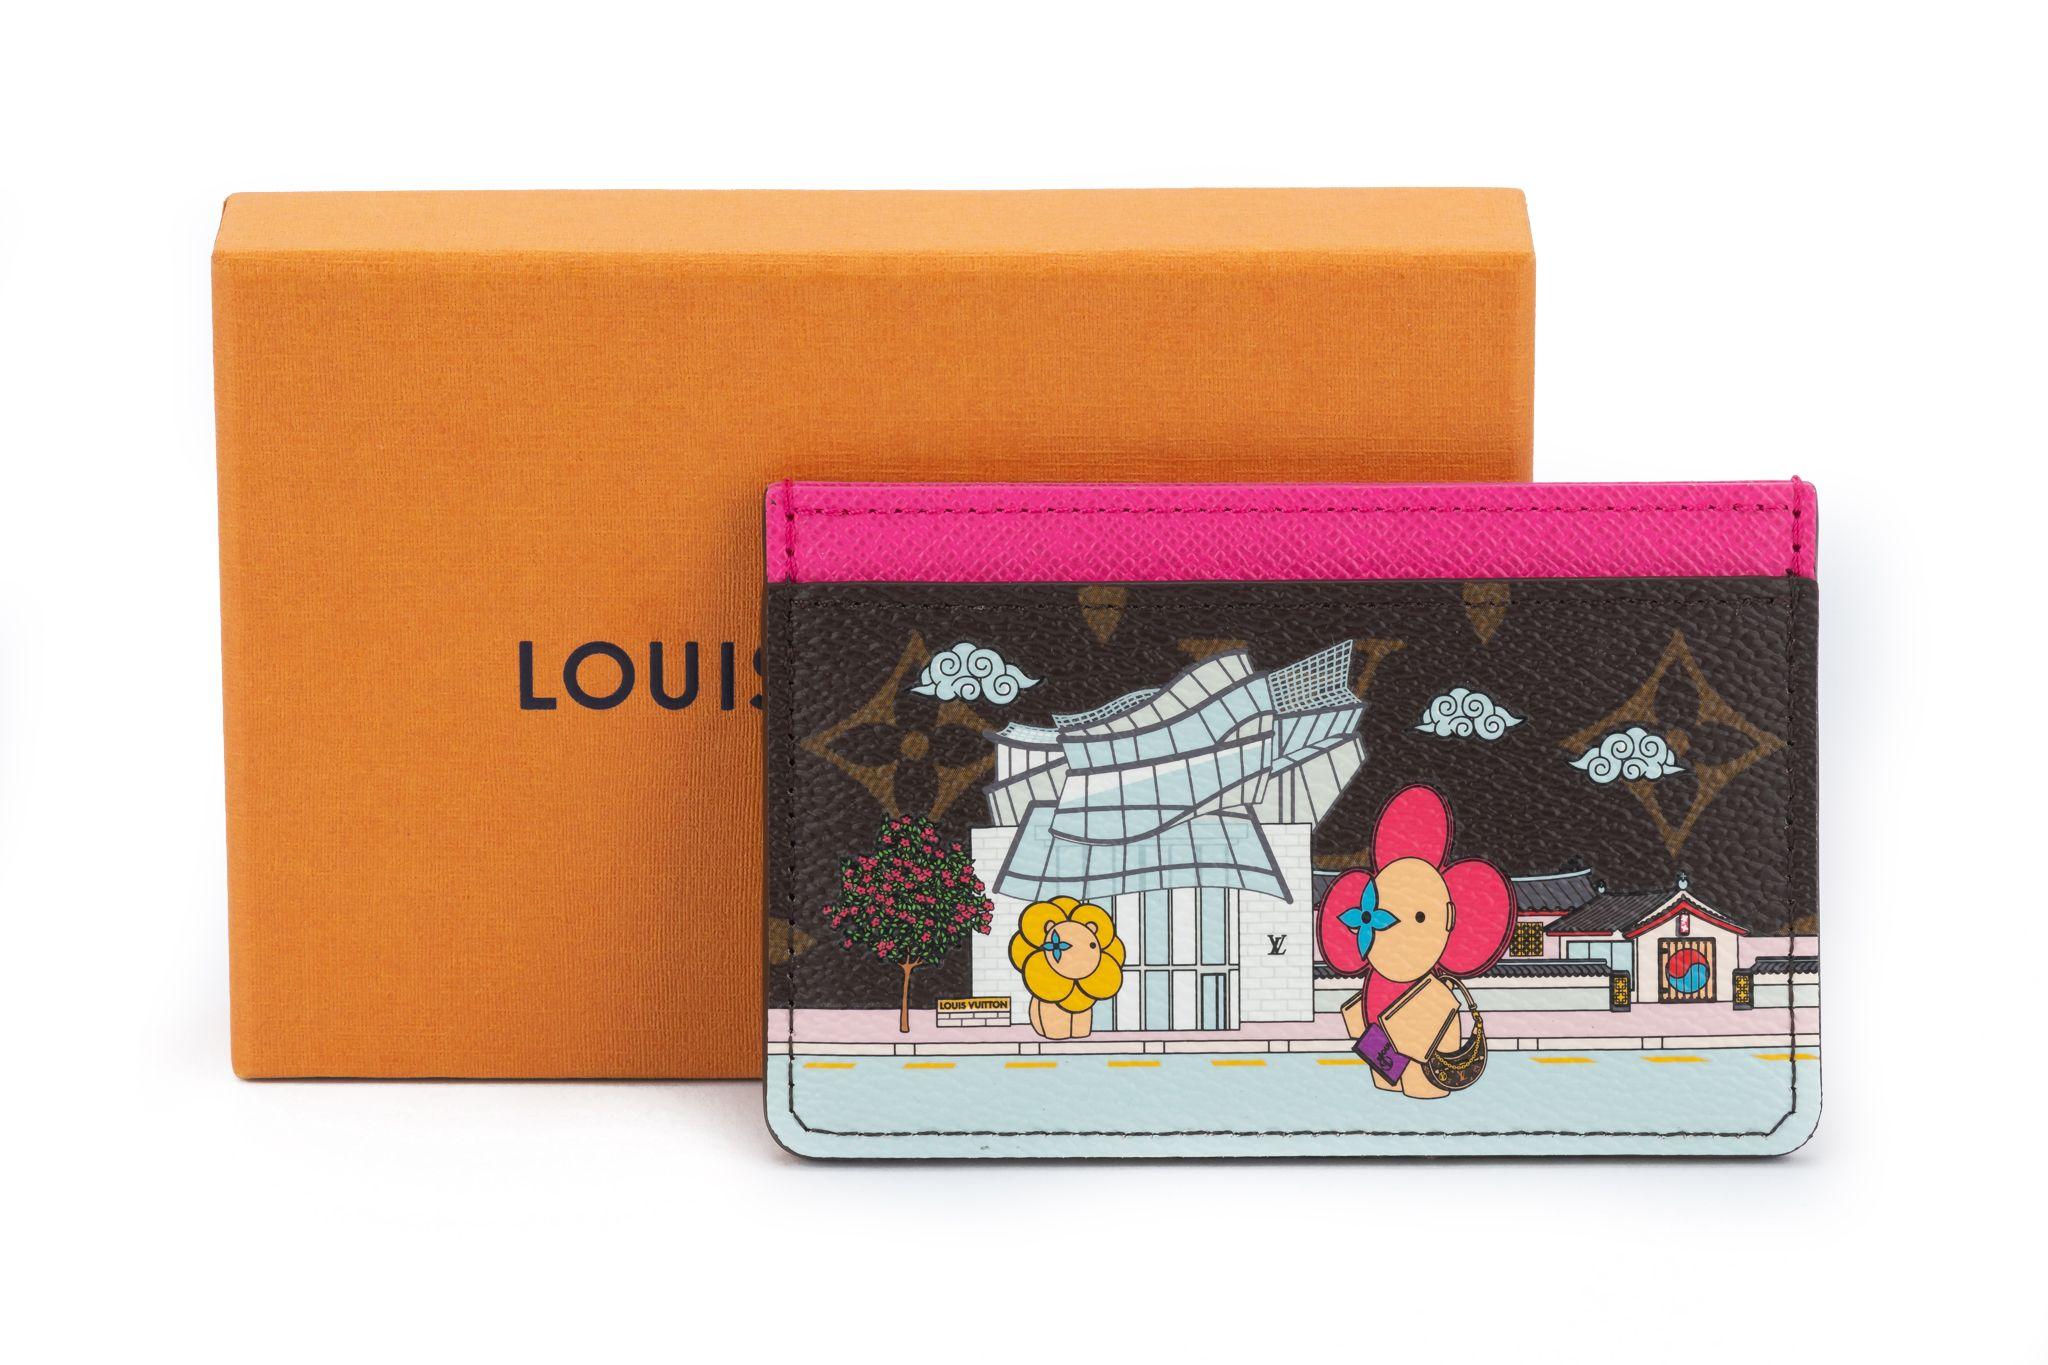 Louis Vuitton Card Holder belongs to the Vivienne Holidays 2022 collection. It's brand new and comes with the original dustcover and box.